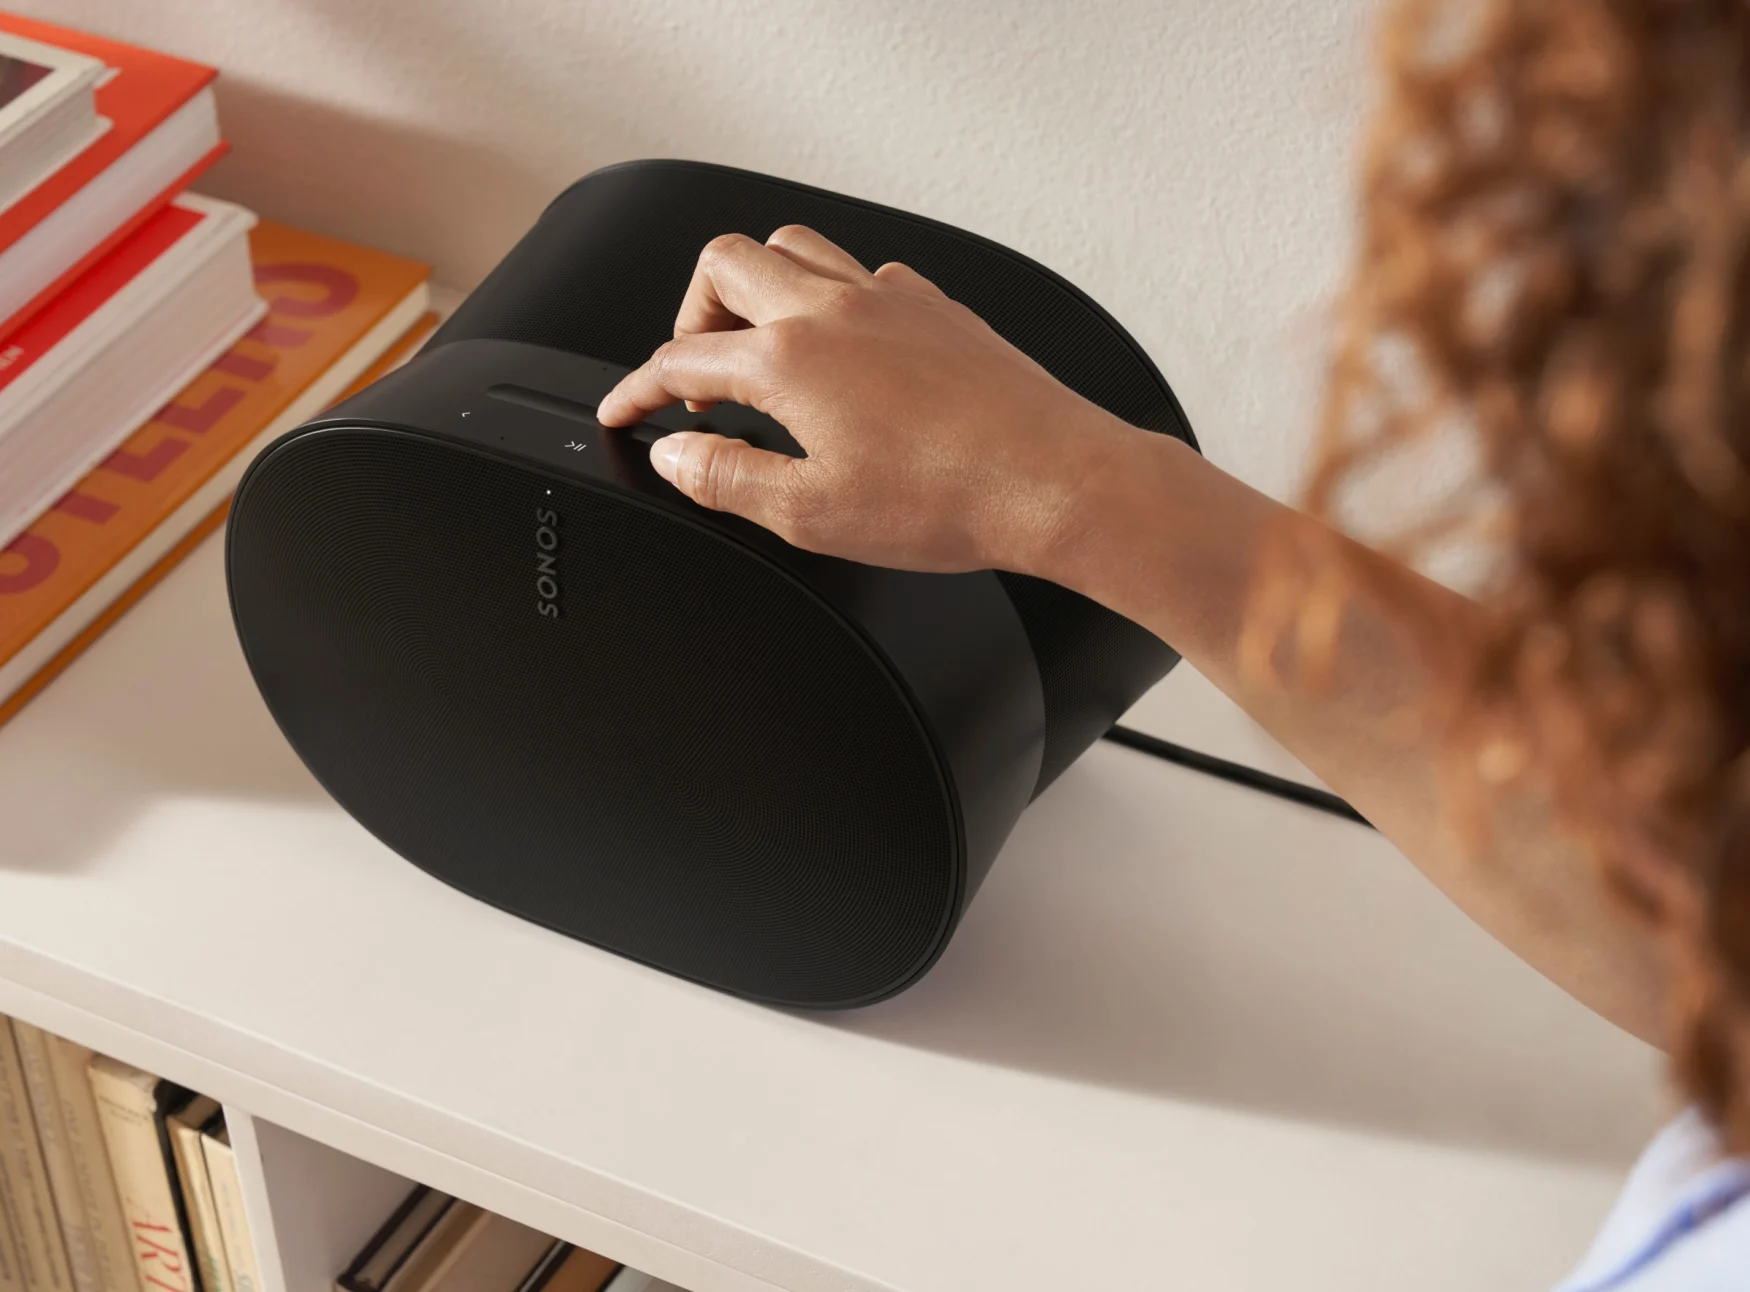 The Sonos Era 300 speaker, with a focus on its redesigned touch control panel